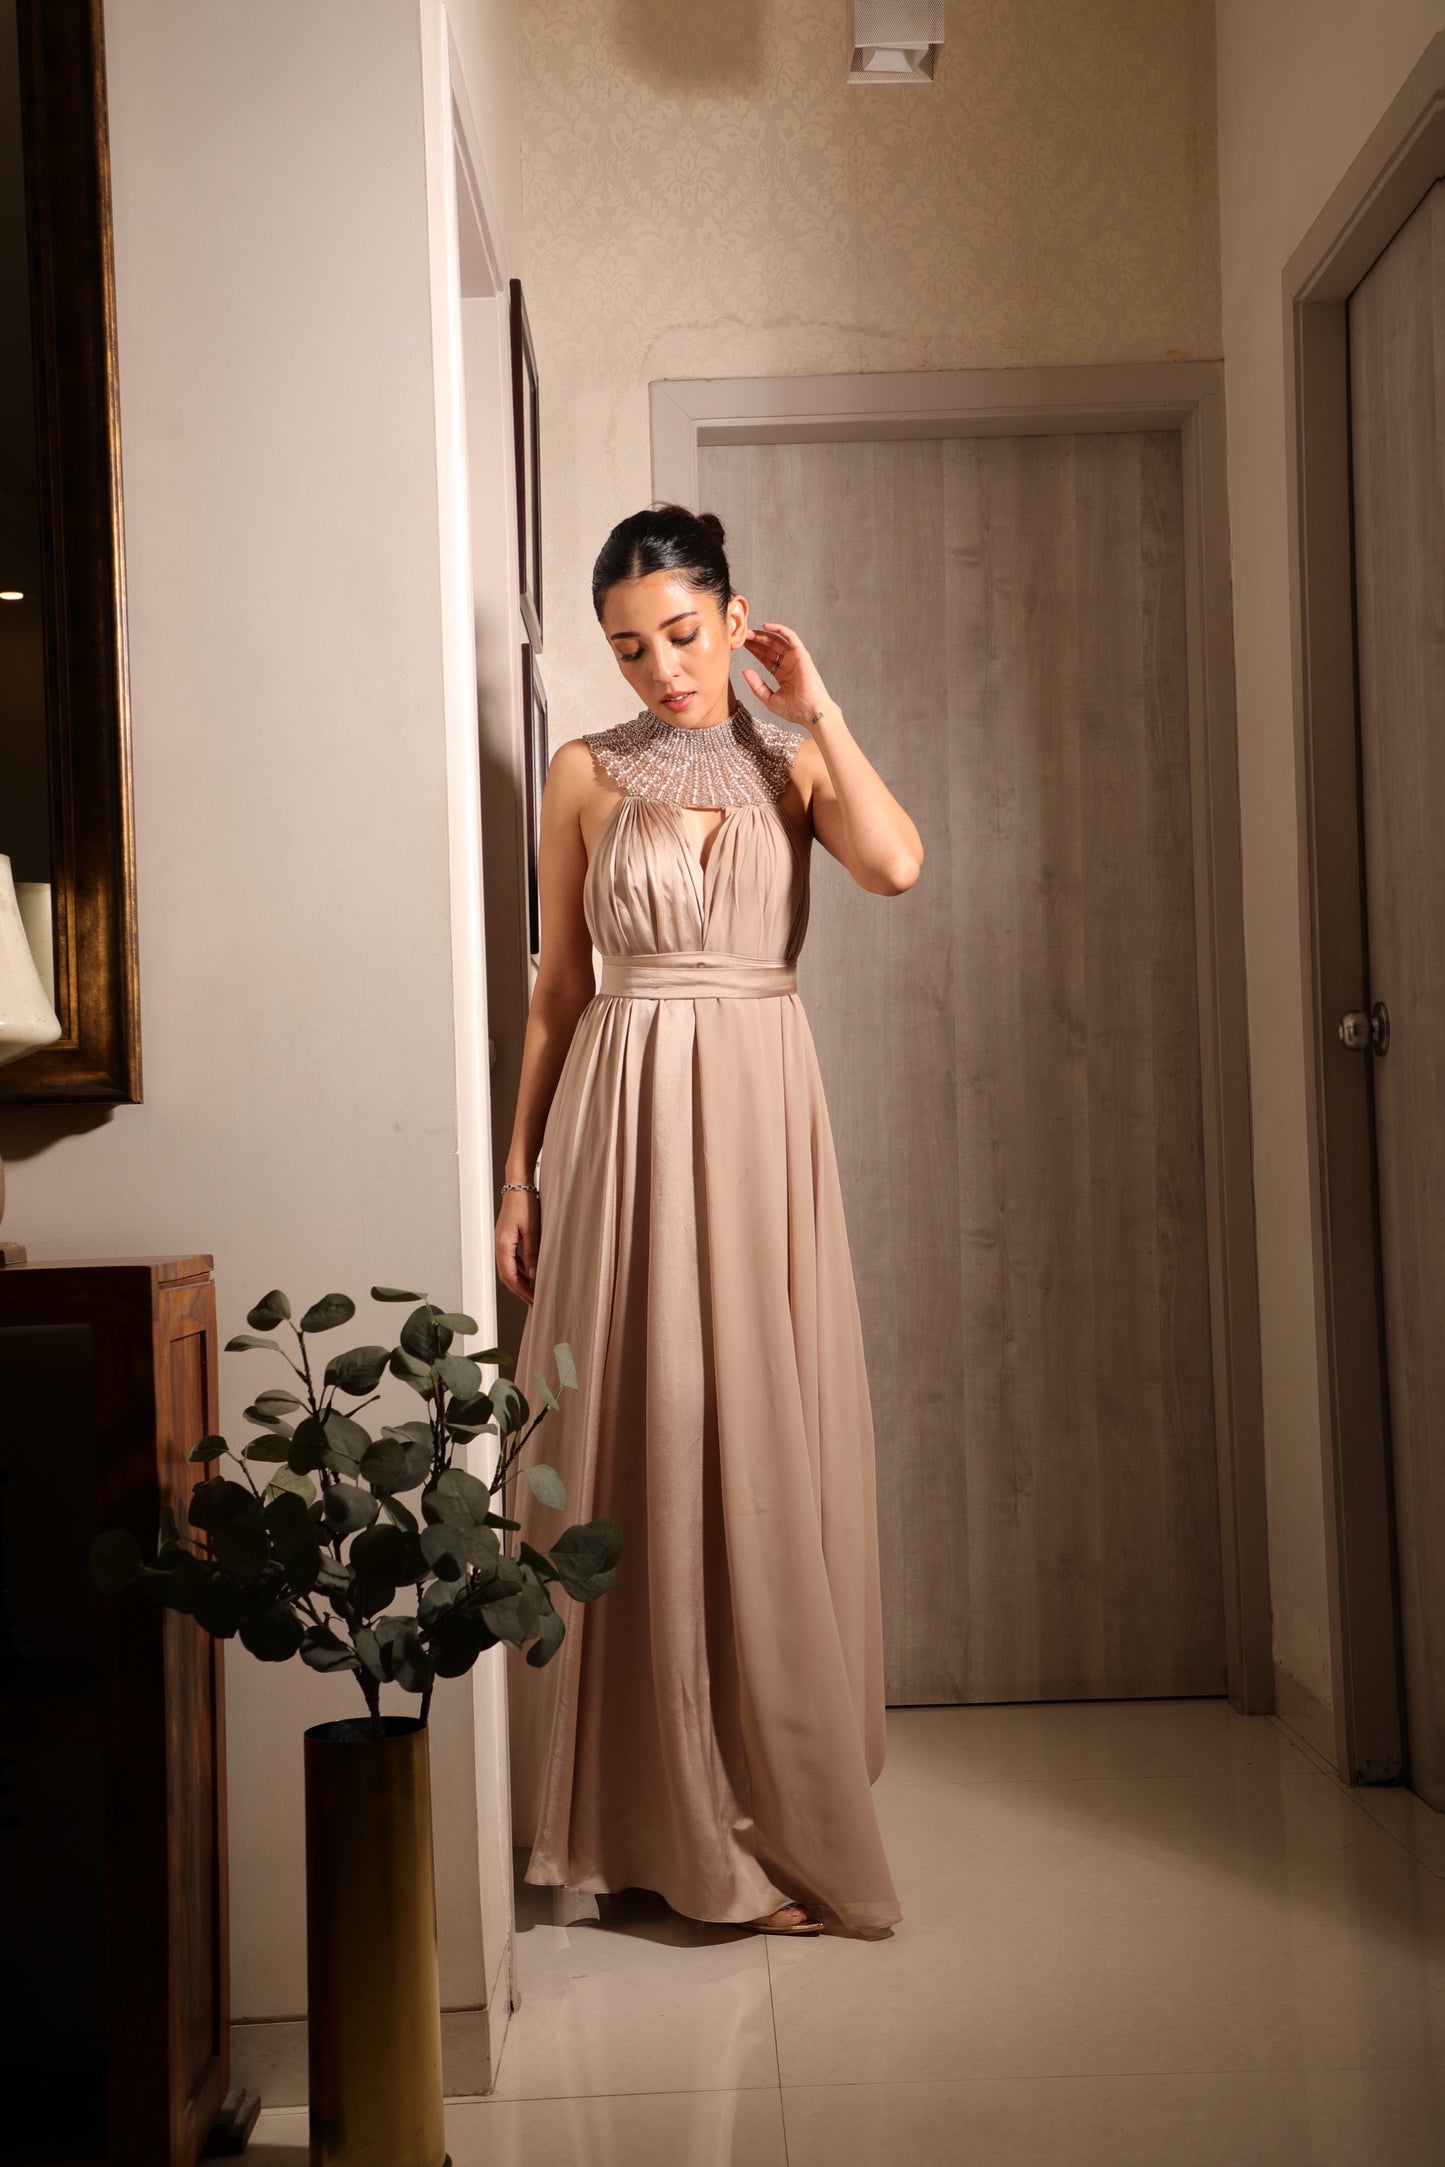 Taupe maxi dress with embellished choker.